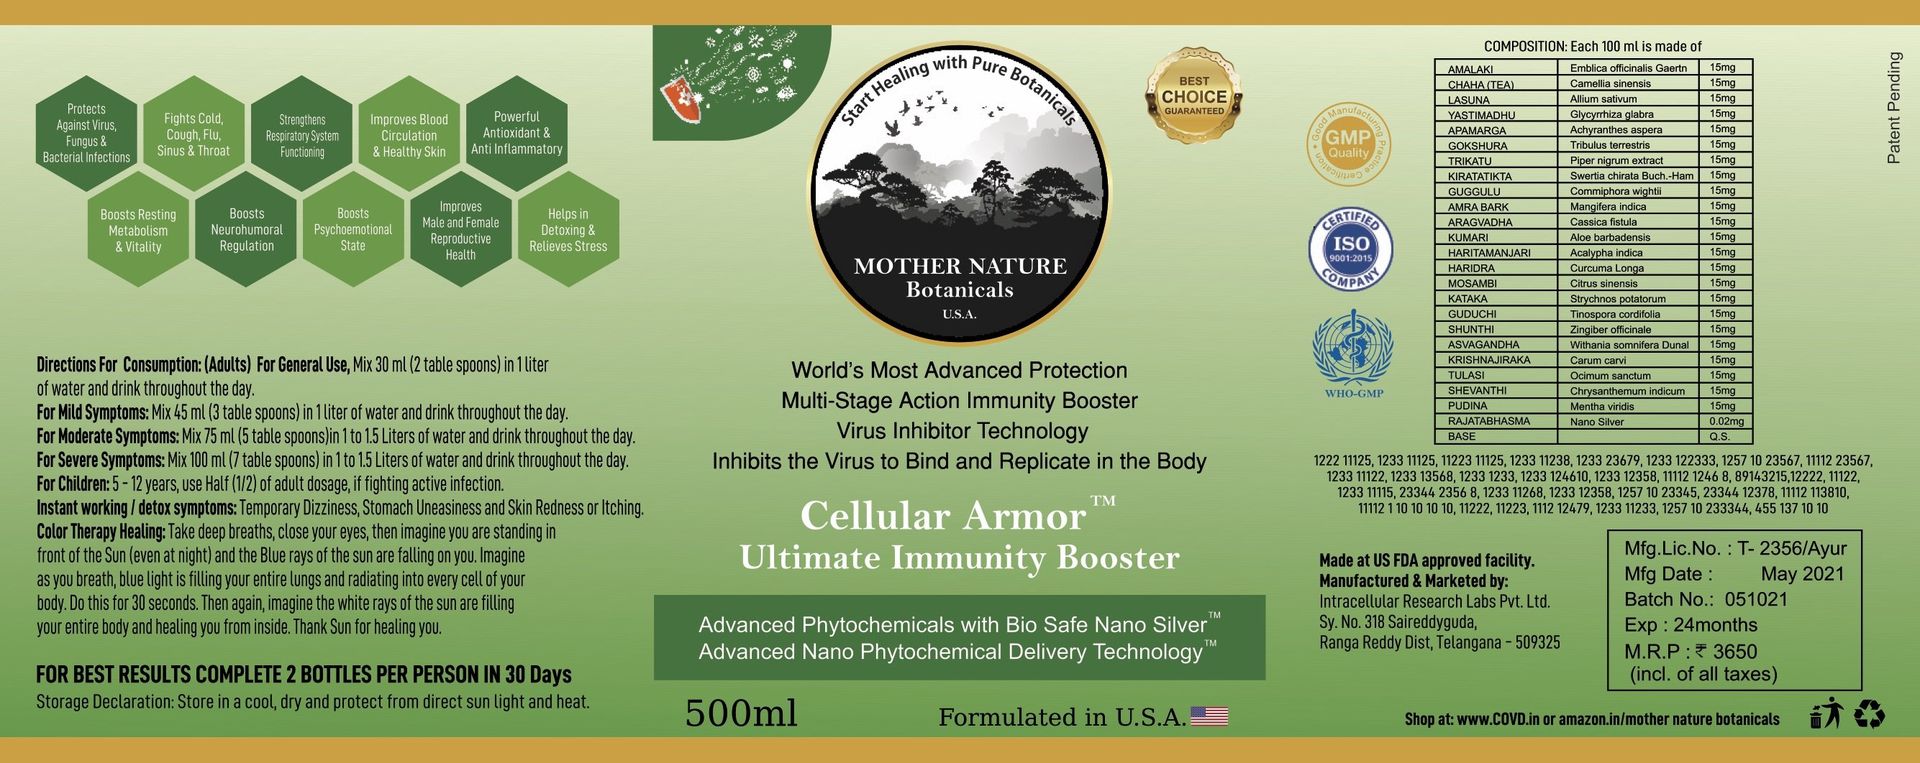 Mother Nature Botanical's Immunity Booster Kit( 2 Ultimate Immunity Boosters, 2 Respiratory Relief Liquid and 1 Oral Health & Mouthwash) - hfnl!fe